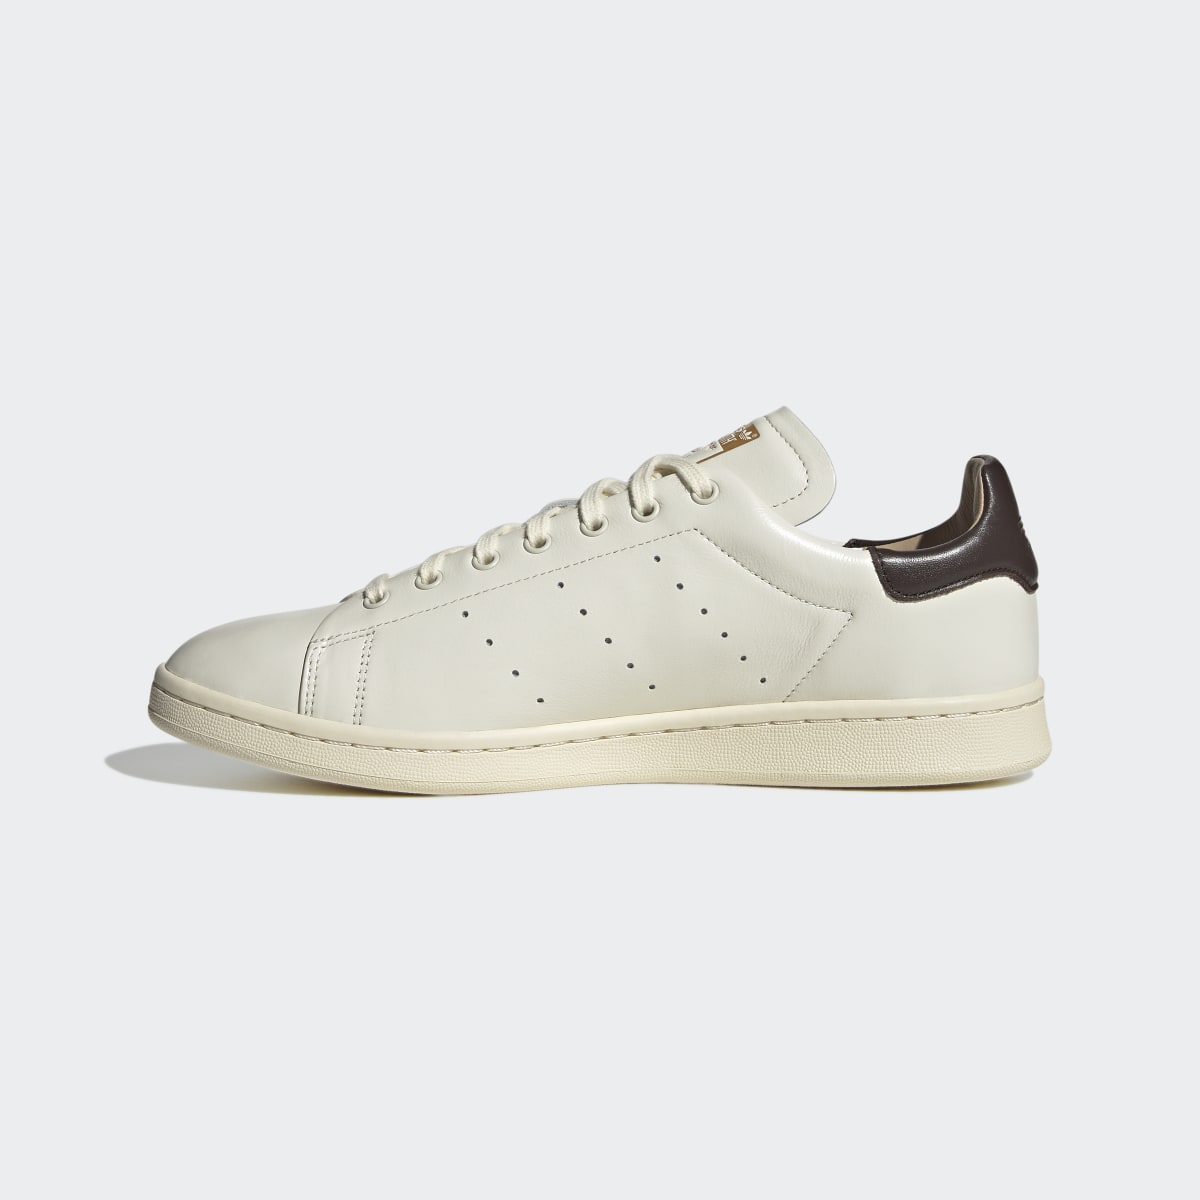 Adidas Stan Smith Lux Shoes. 7